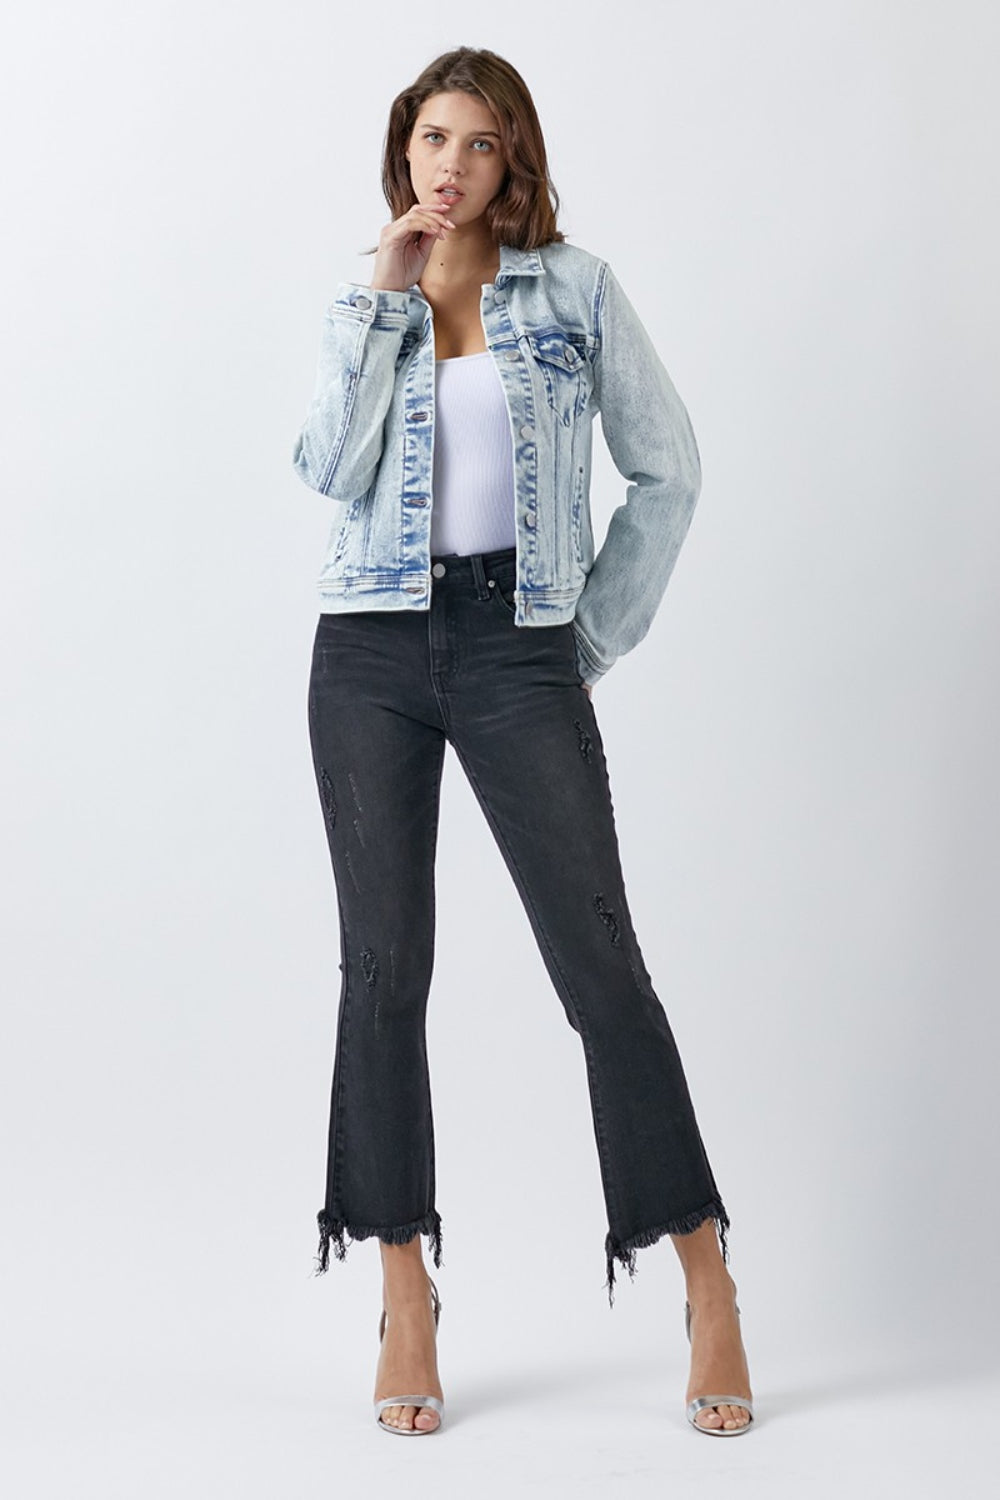 Open Up Denim Jacket - Cheeky Chic Boutique